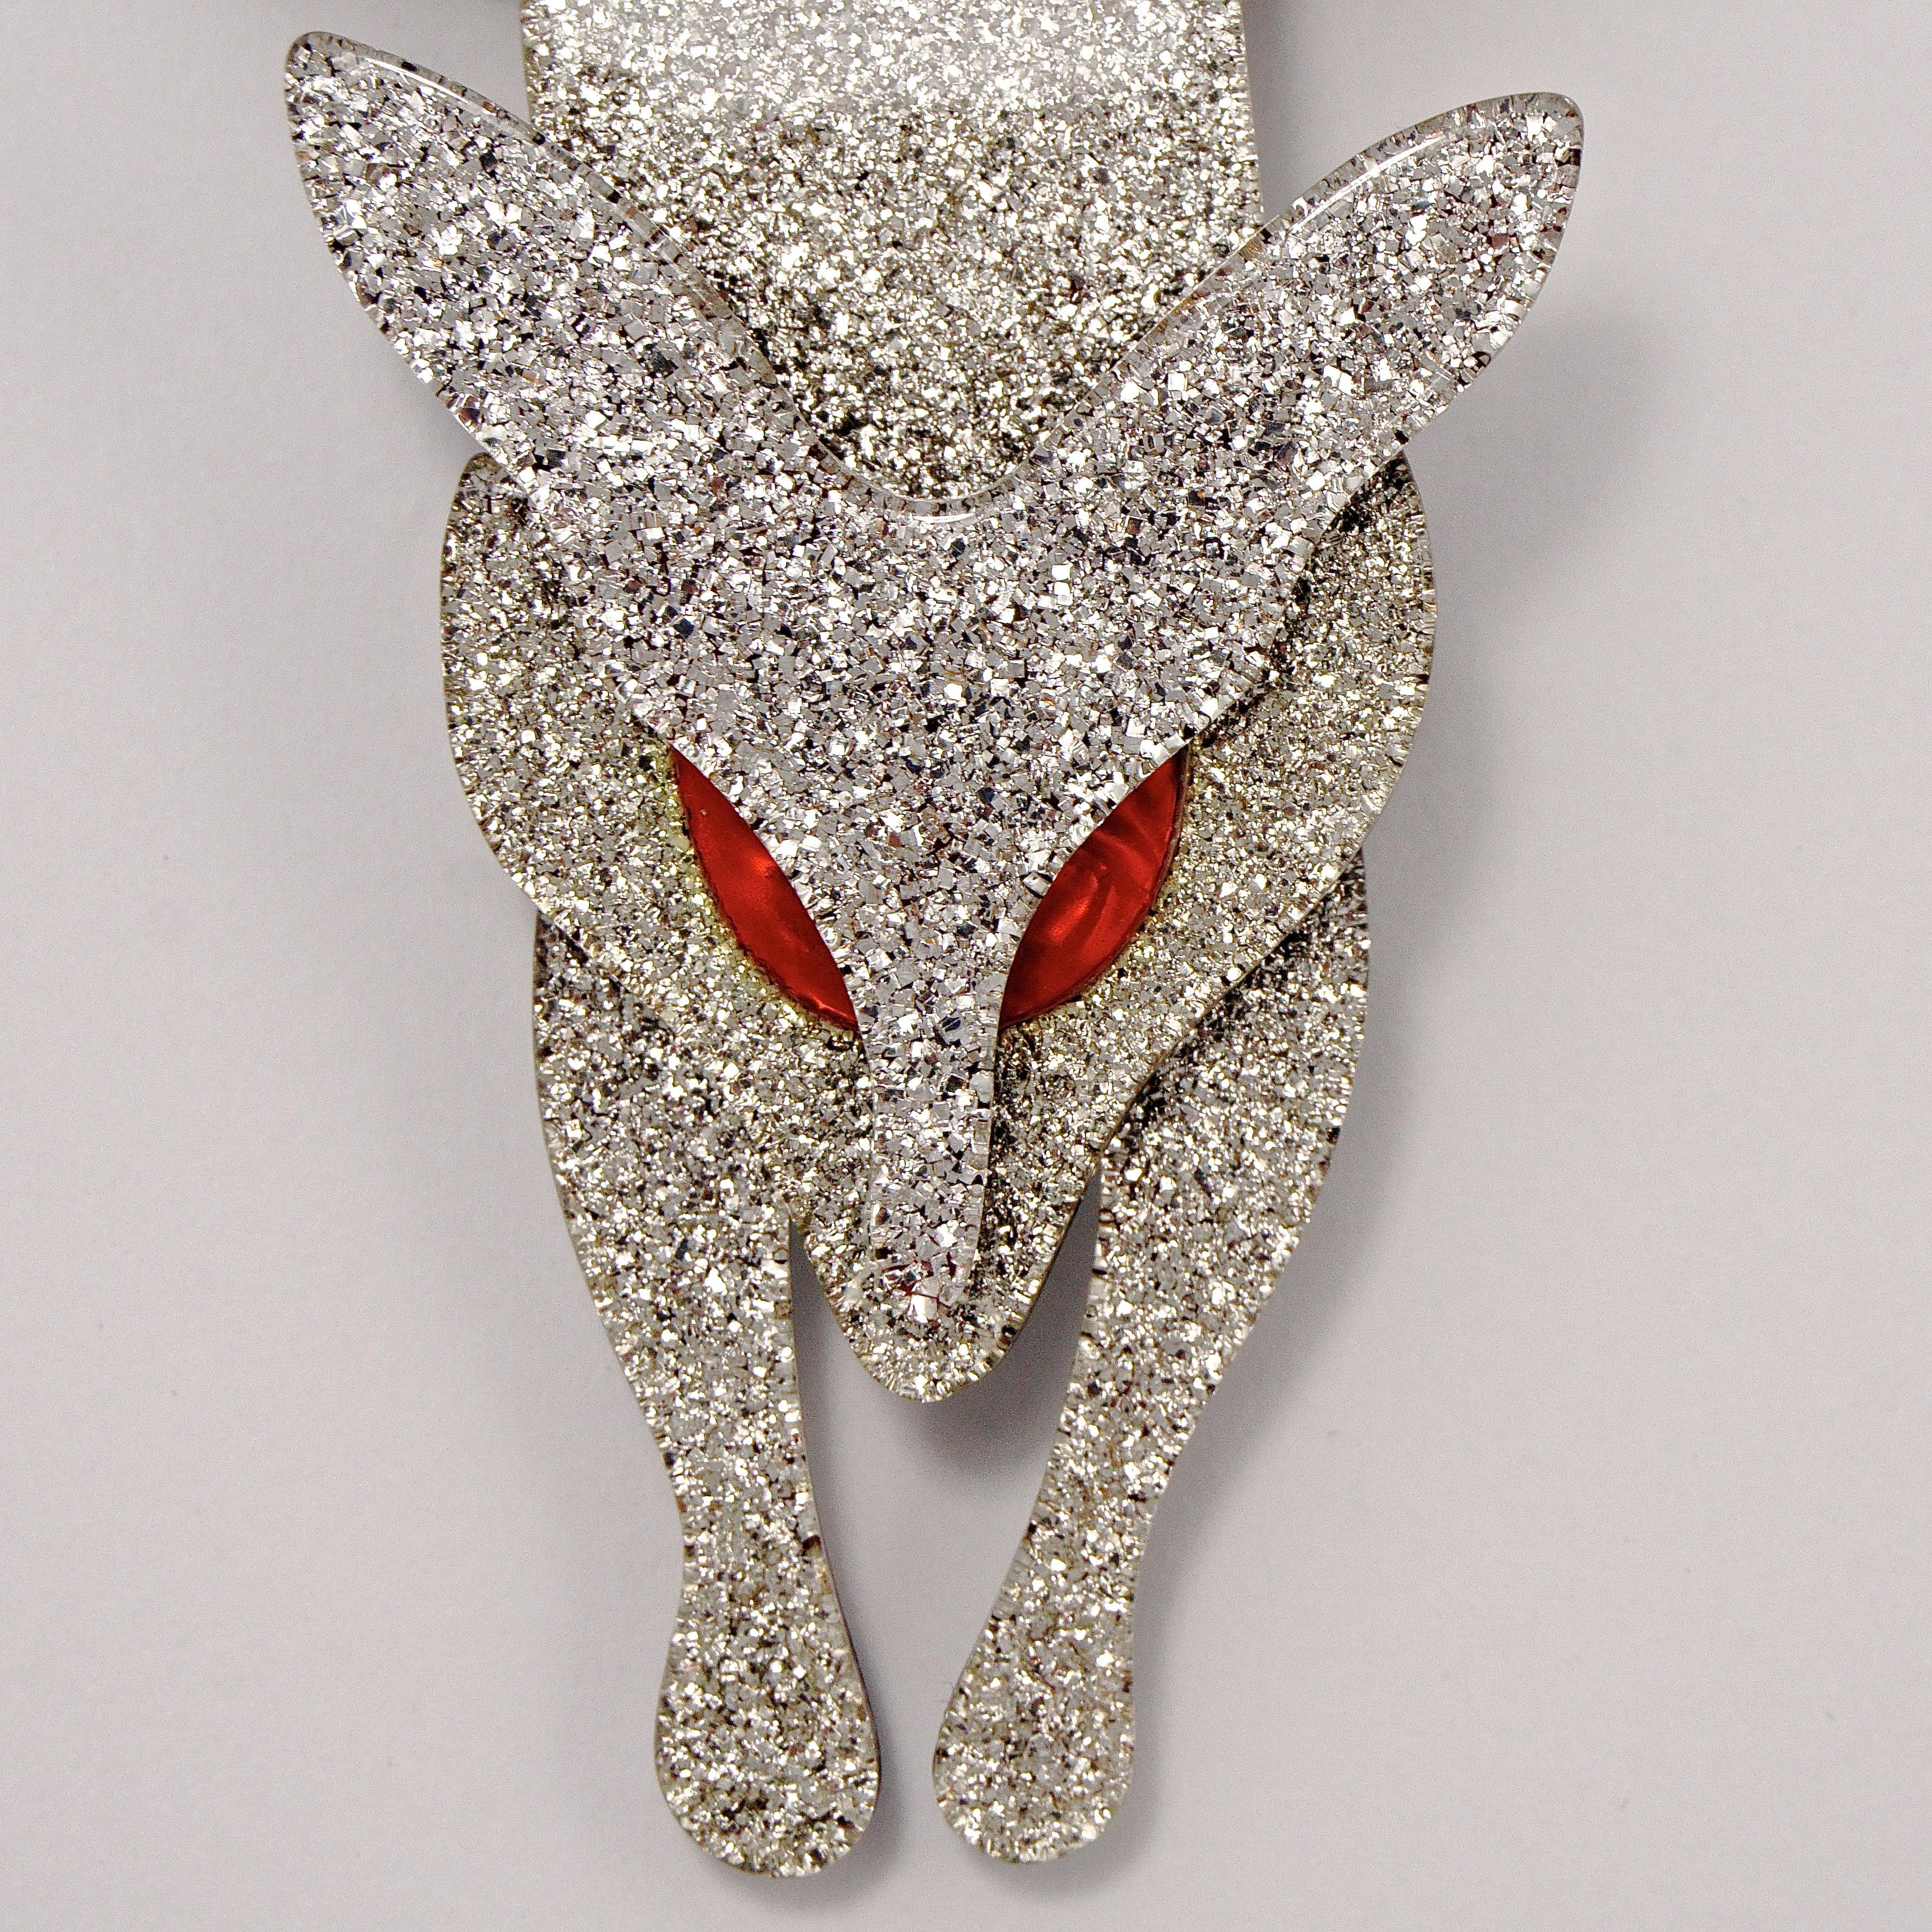 Lea Stein silver fox brooch with red eyes in very good condition, and featuring a wonderful sparkly design. The brooch is made from layered plastic, and measures length 9.2cm / 3.6 inches, by maximum width 6cm / 2.36 inches.

This is a beautiful